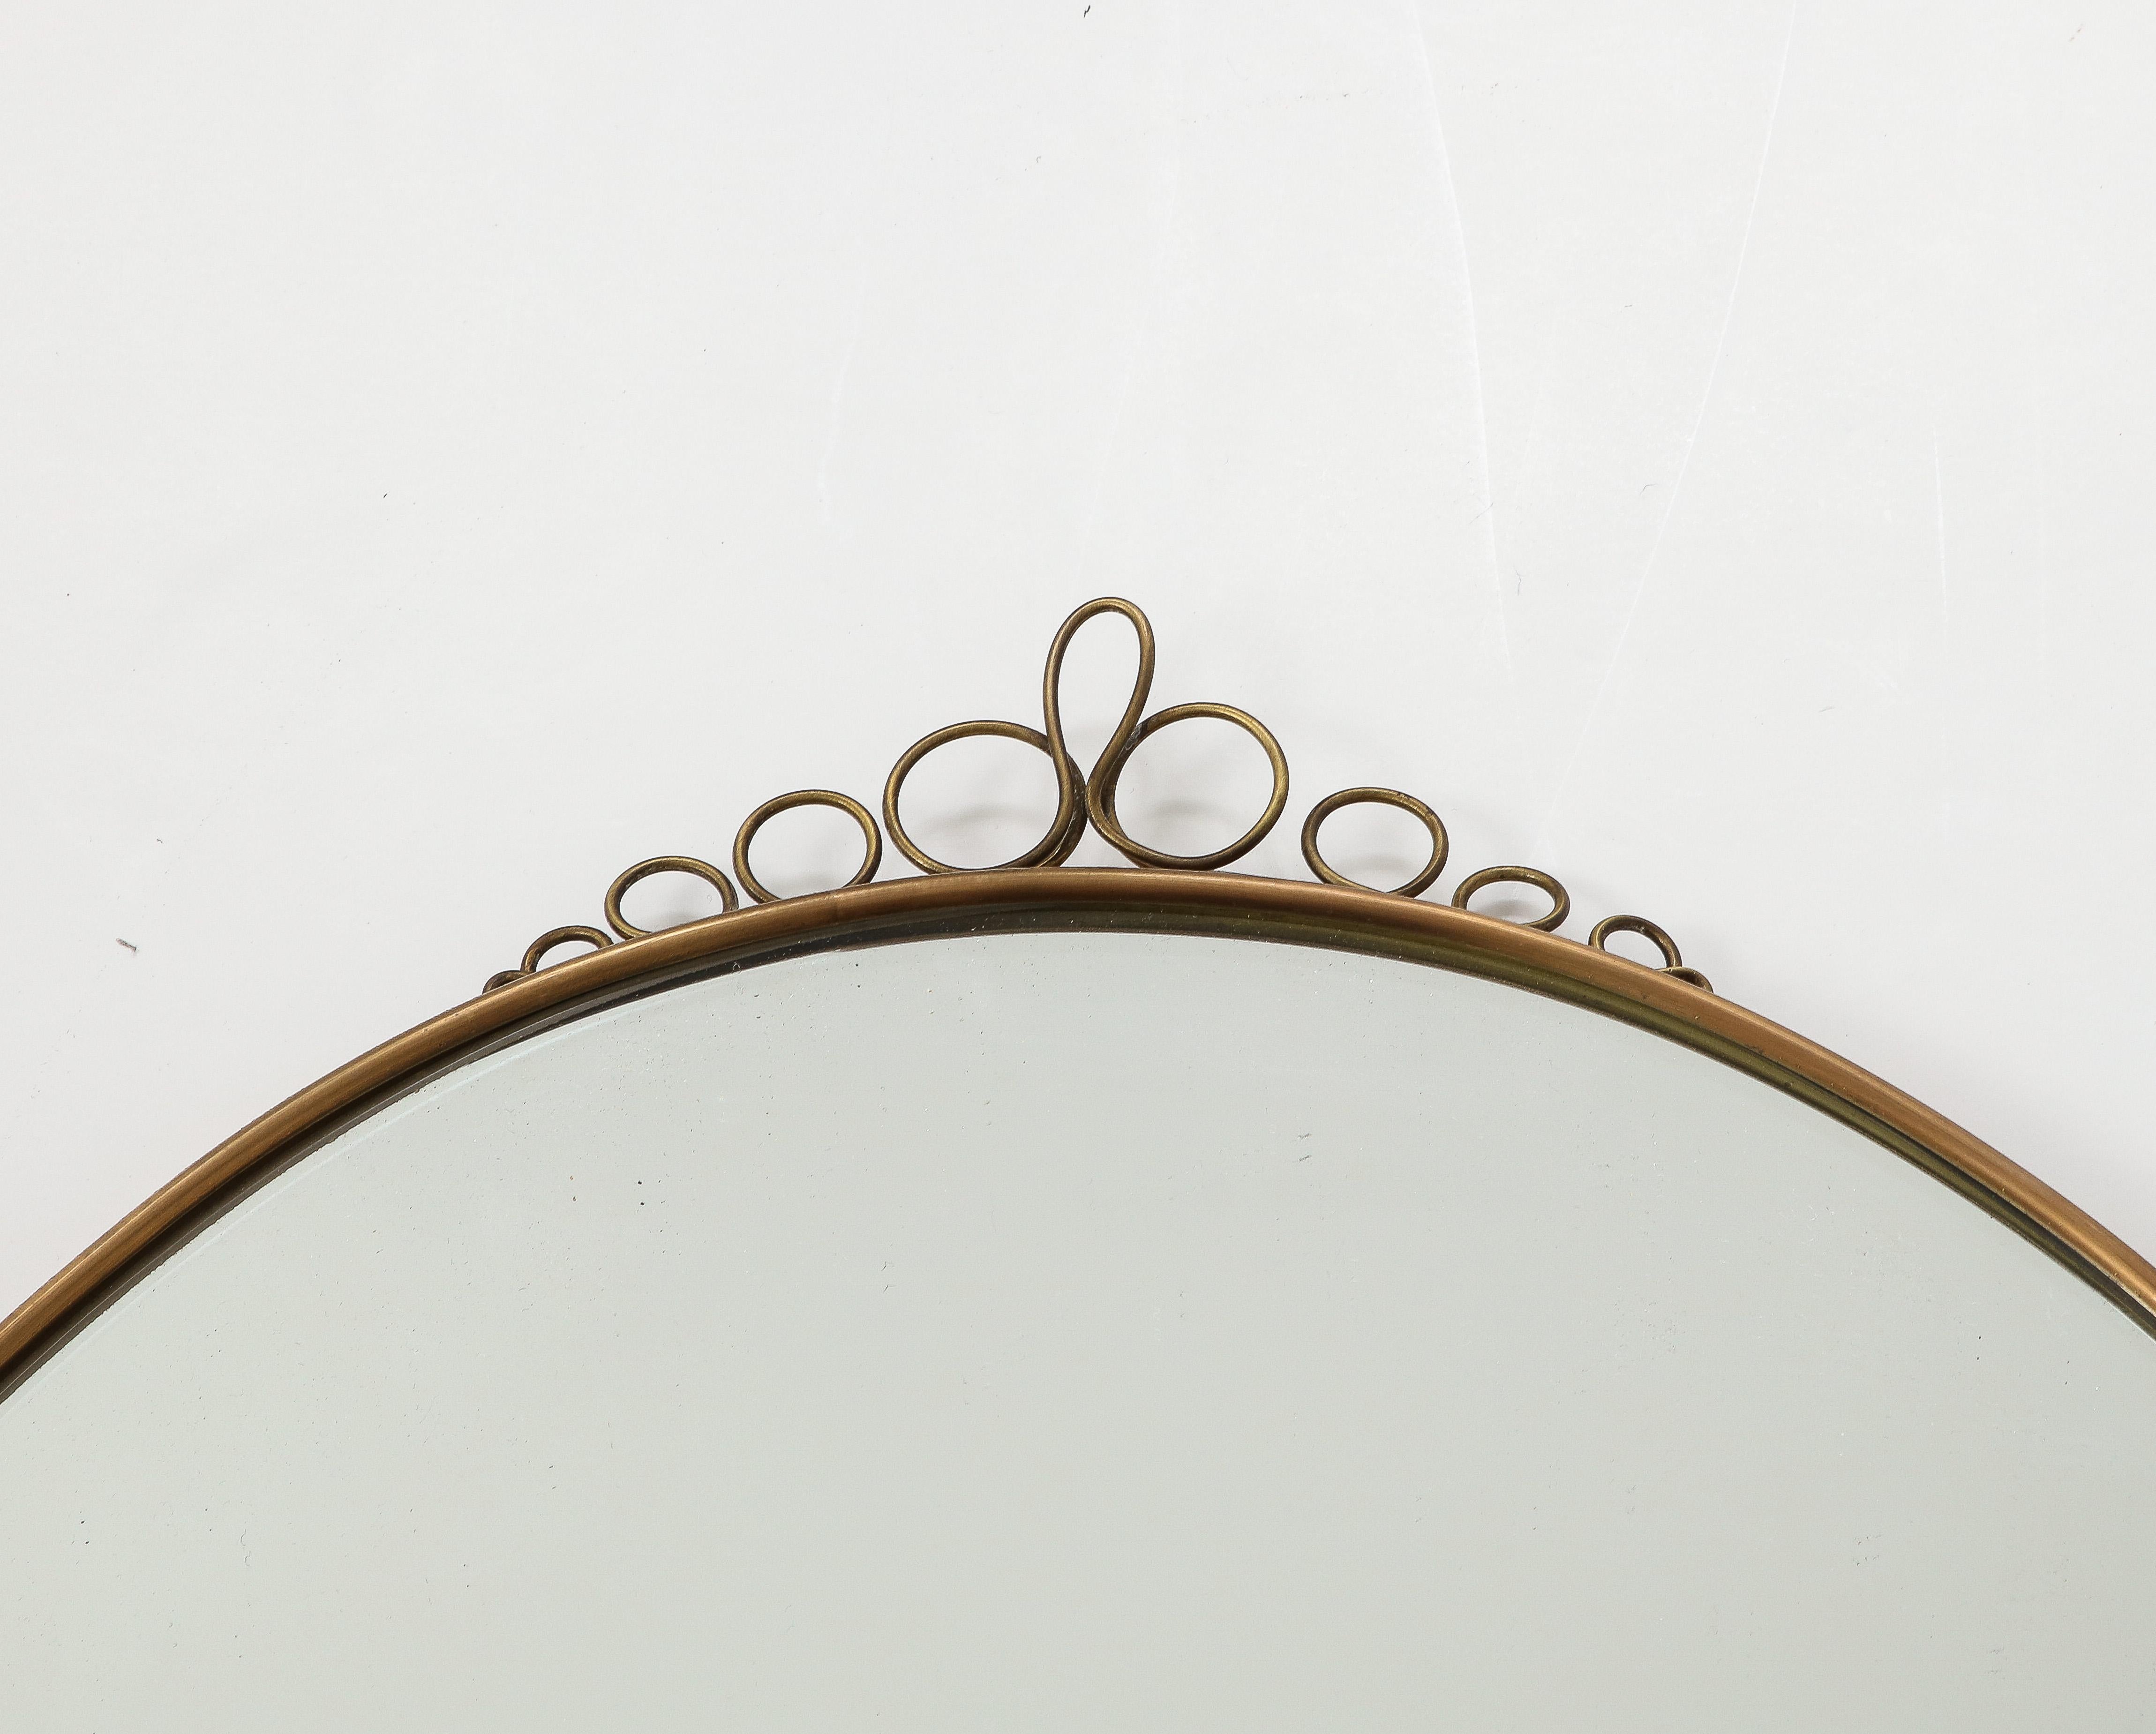 1960s Italian modernist elegant oval brass wall mirror with decorative brass scroll elements on central top and bottom frame. This lovely mirror has a beautiful patina on the brass and illustrates in its playful scroll decorations the Italian